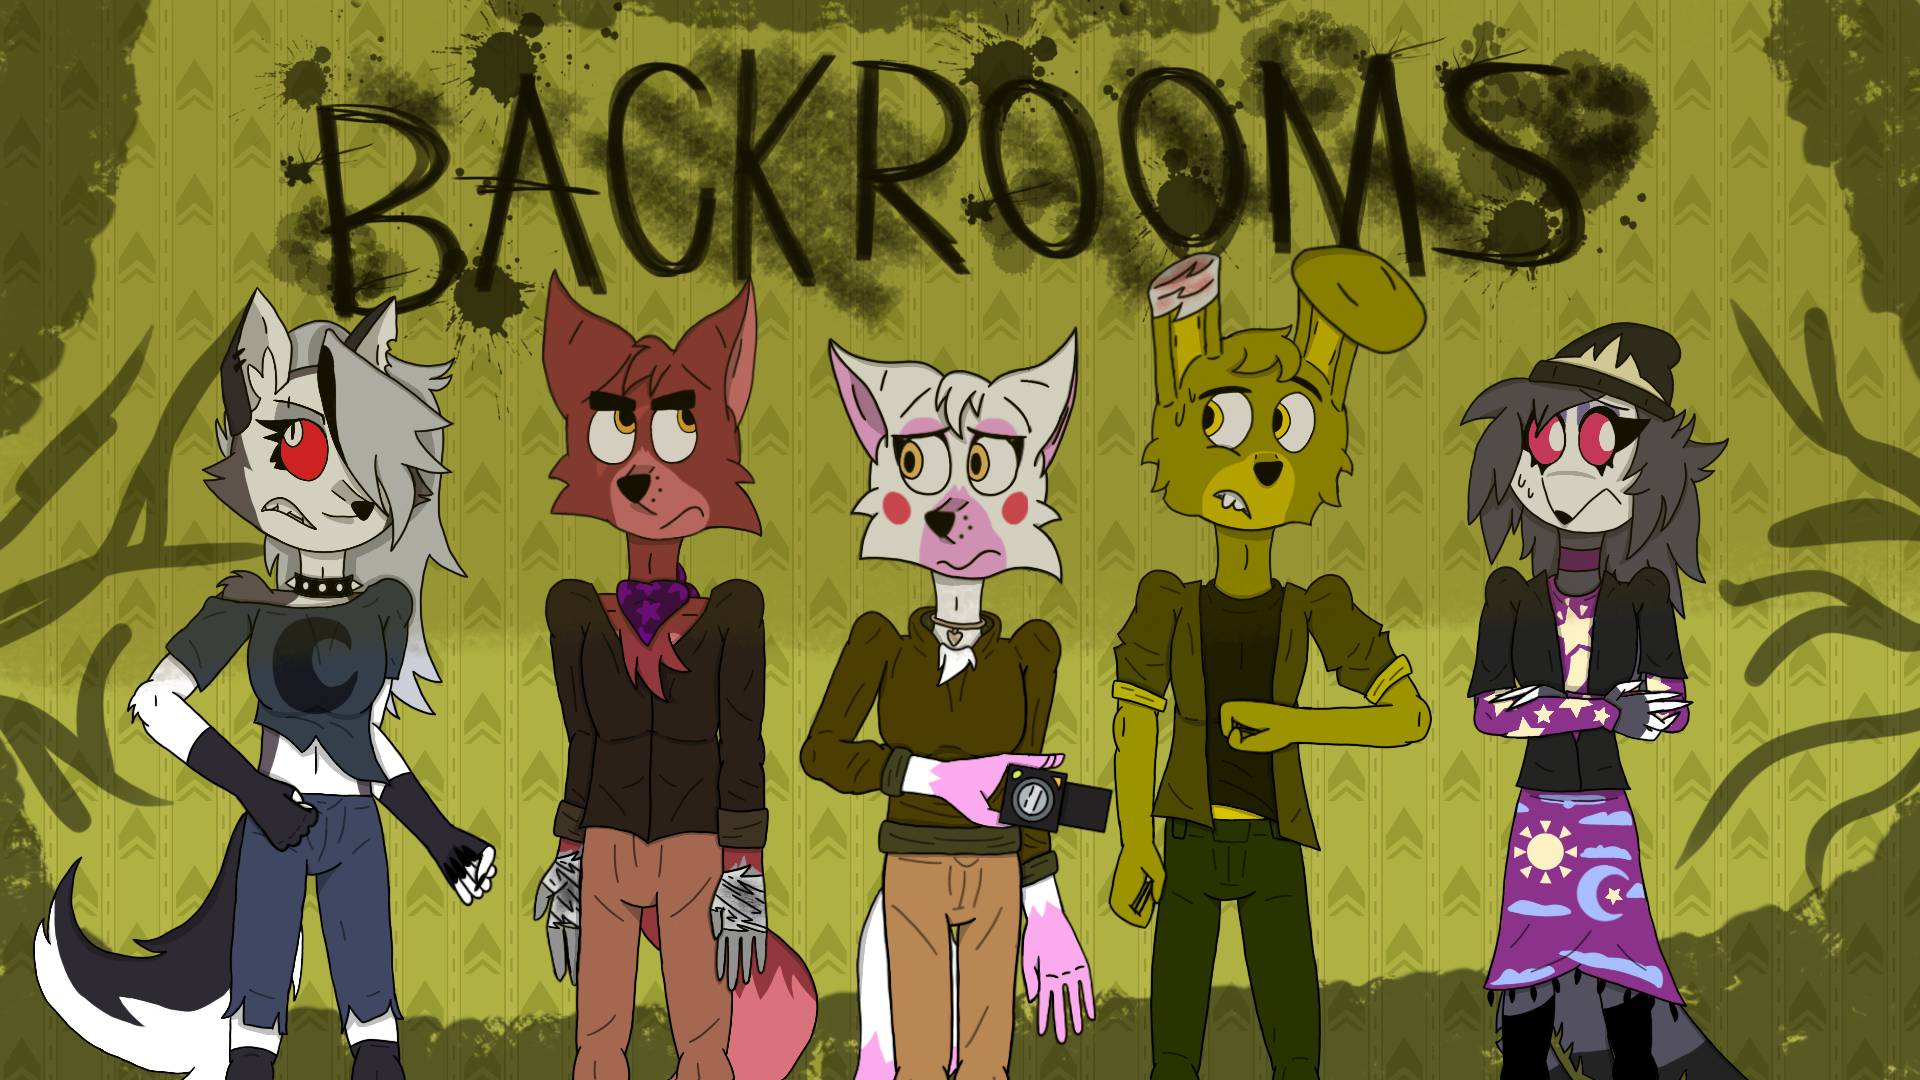 Backrooms Level 5 The Hotel by Drakesonofthedragon2 on DeviantArt